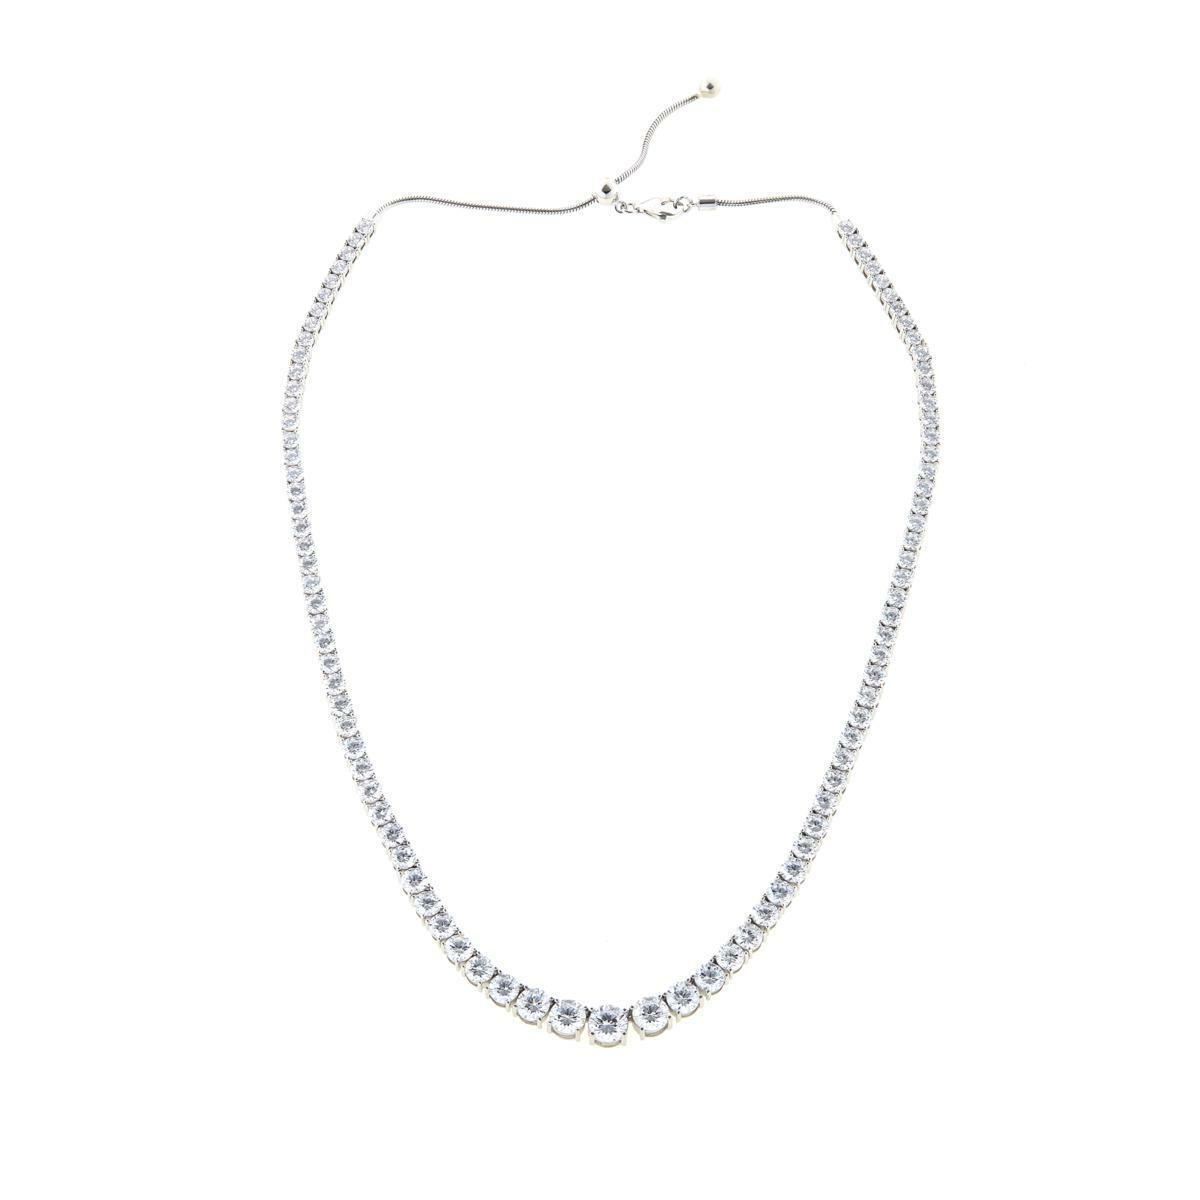 Absolute 21.27Ctw Cz Graduated 18" Adjustable Line Necklace Hsn $260